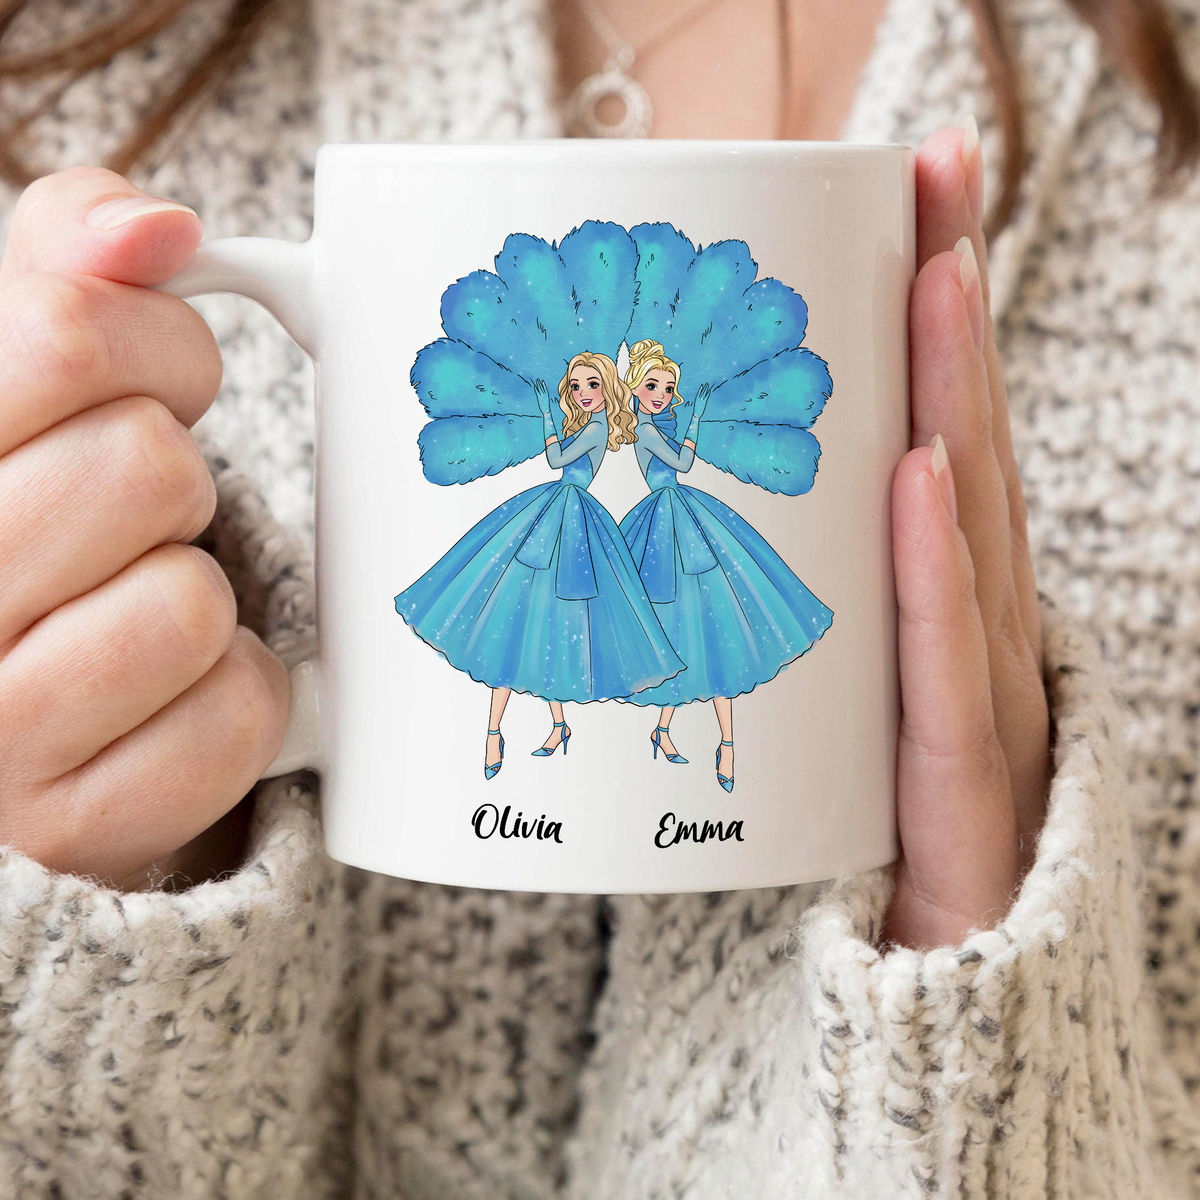 Personalized Mug - Personalized Mug For Sisters - Sisters Sisters - White Christmas - Up To 5 Woman, gift for her, gift for sisters (58095)_1